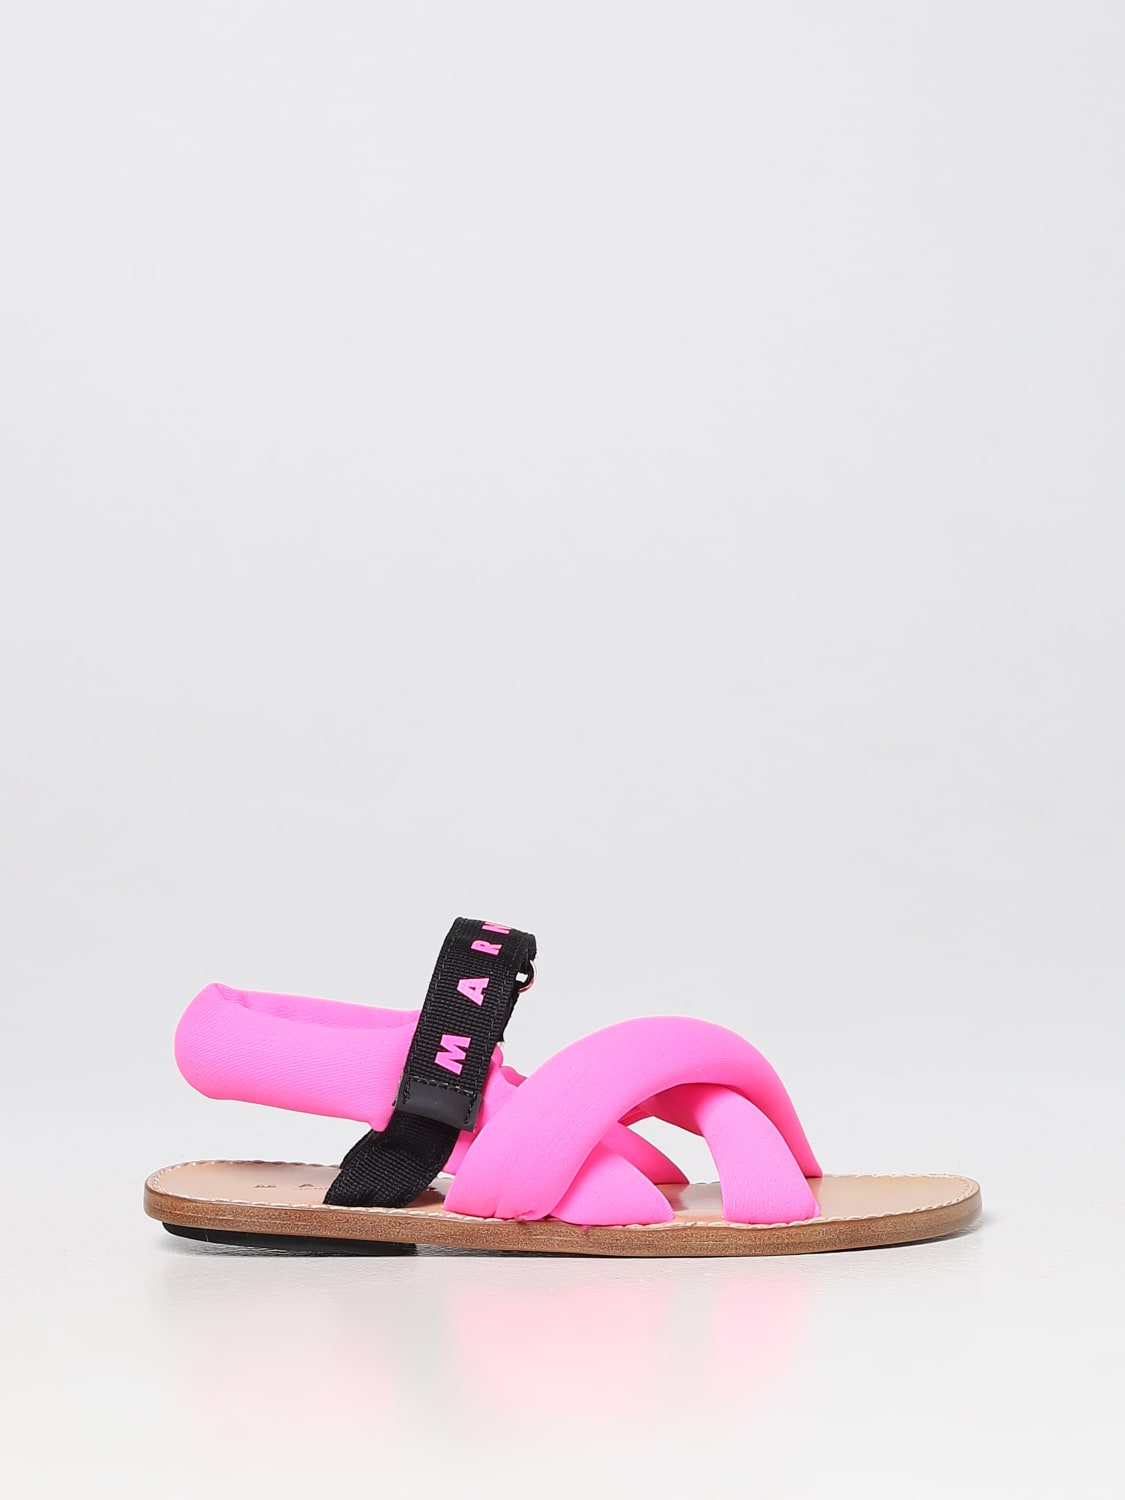 MARNI: in fabric - Pink | Marni shoes 7347302 online on